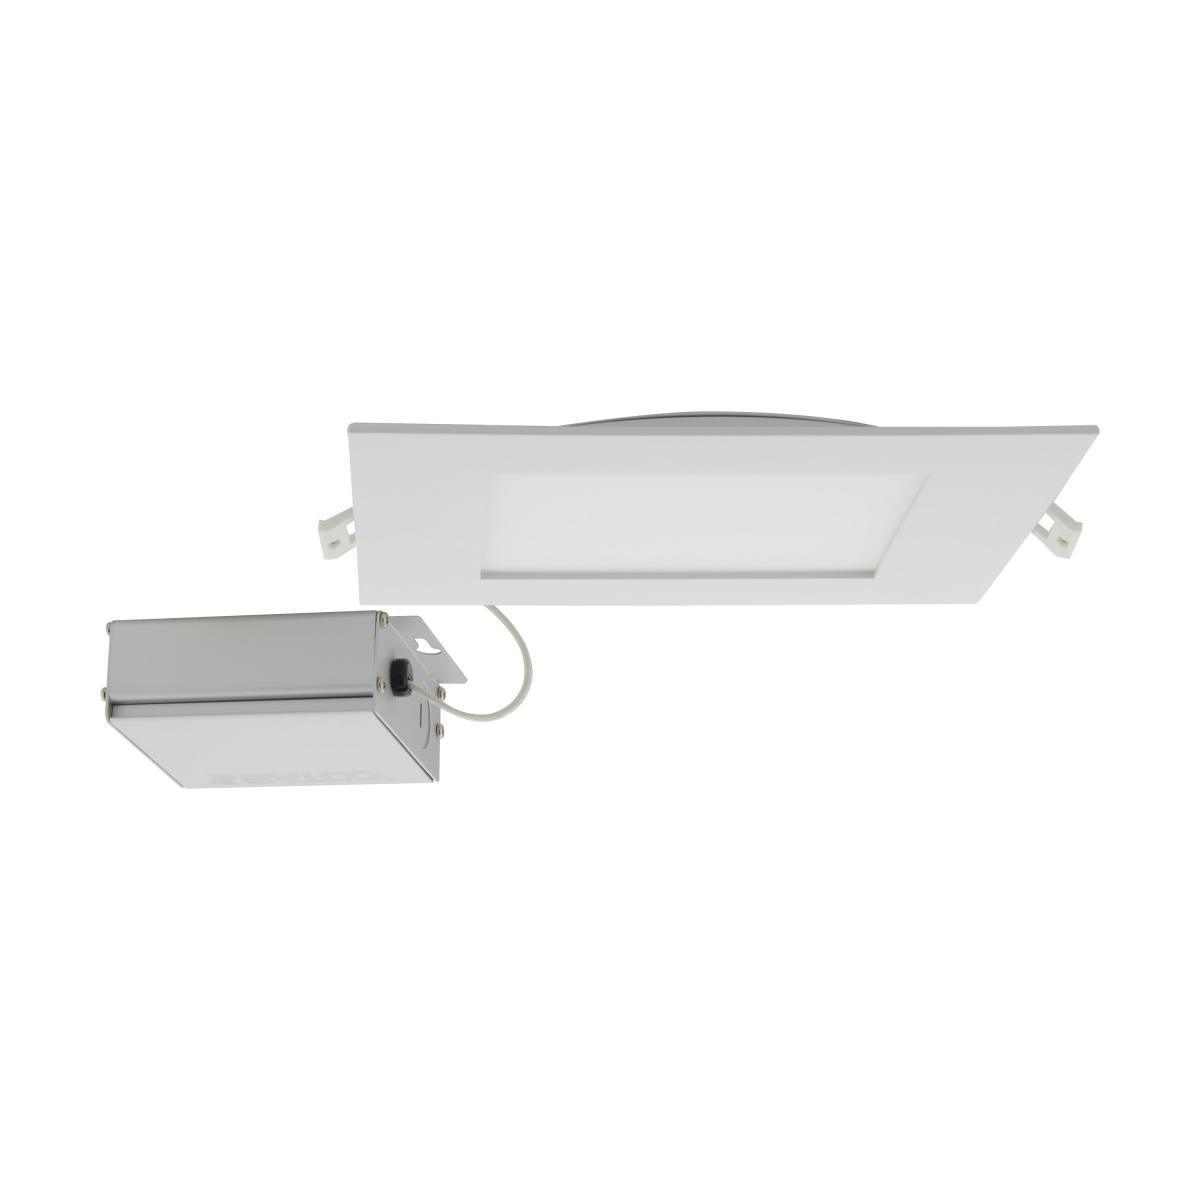 8 Inch Ultra Slim Canless LED Recessed Light, Square, 12 Watt, 1650 Lumens, Selectable CCT, 2700K to 5000K, Remote Driver